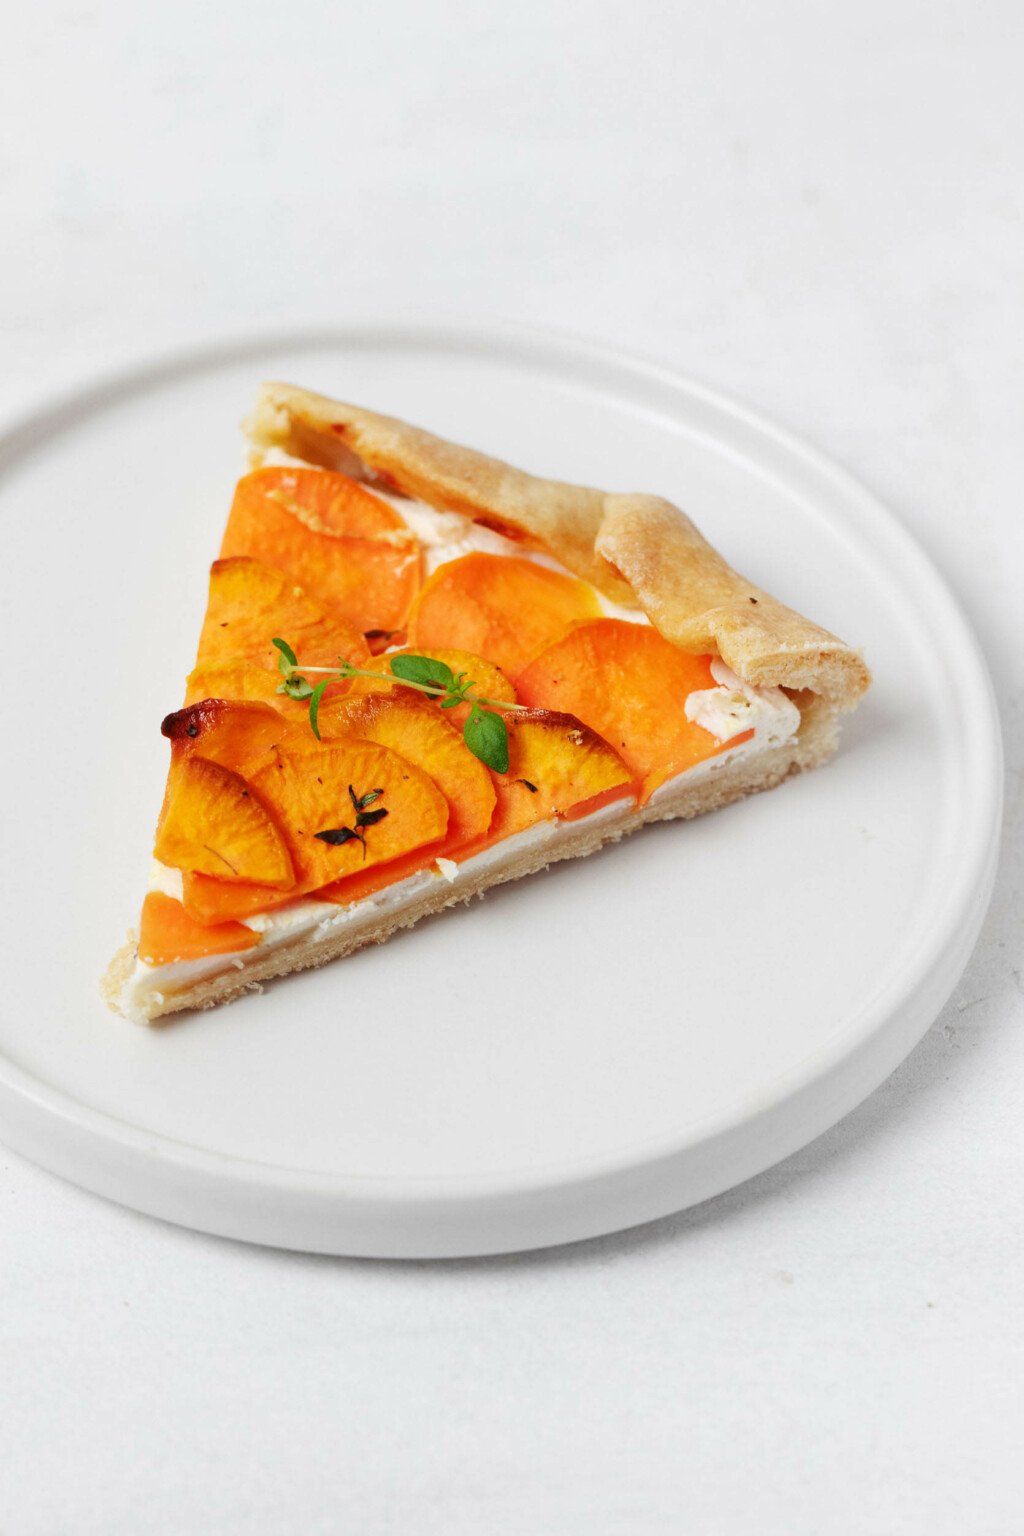 A triangular slice of a vegan galette, which is made with sweet potatoes and cashew cheese, is resting on a small, white plate.